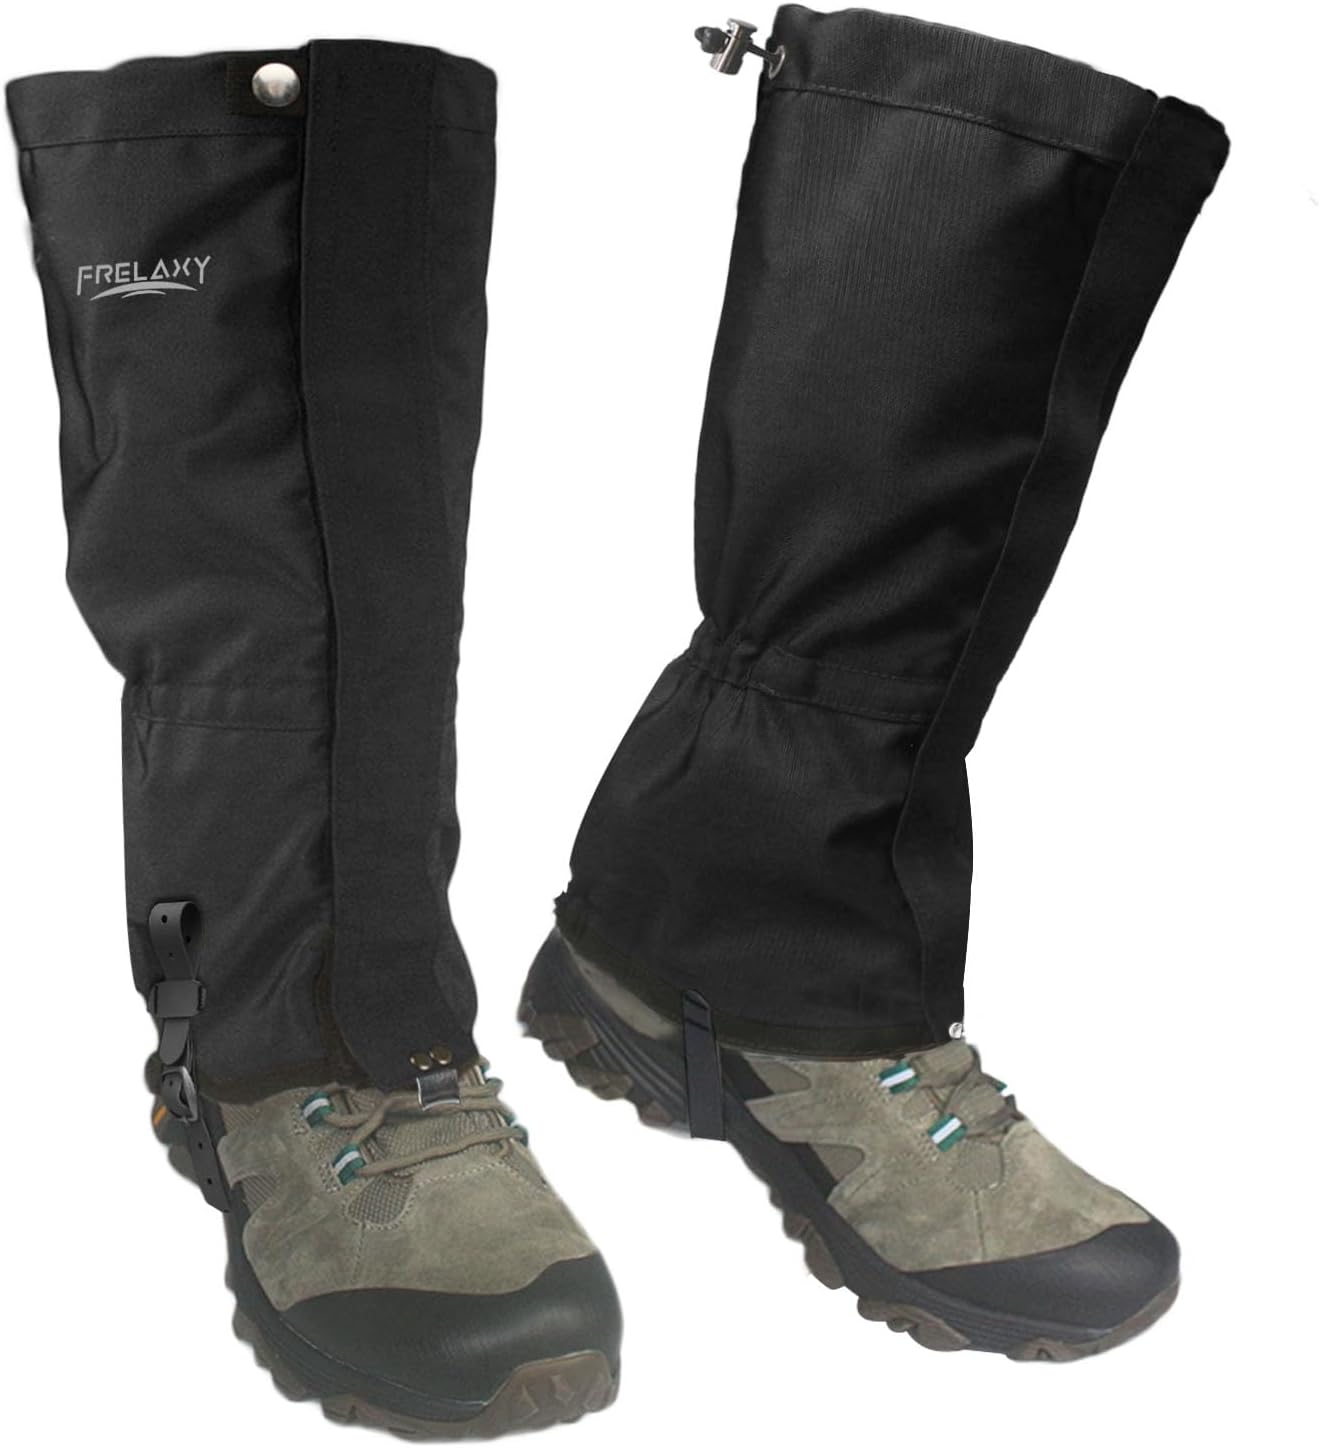 High Performance Leg Gaiters. Perfect For The Snow